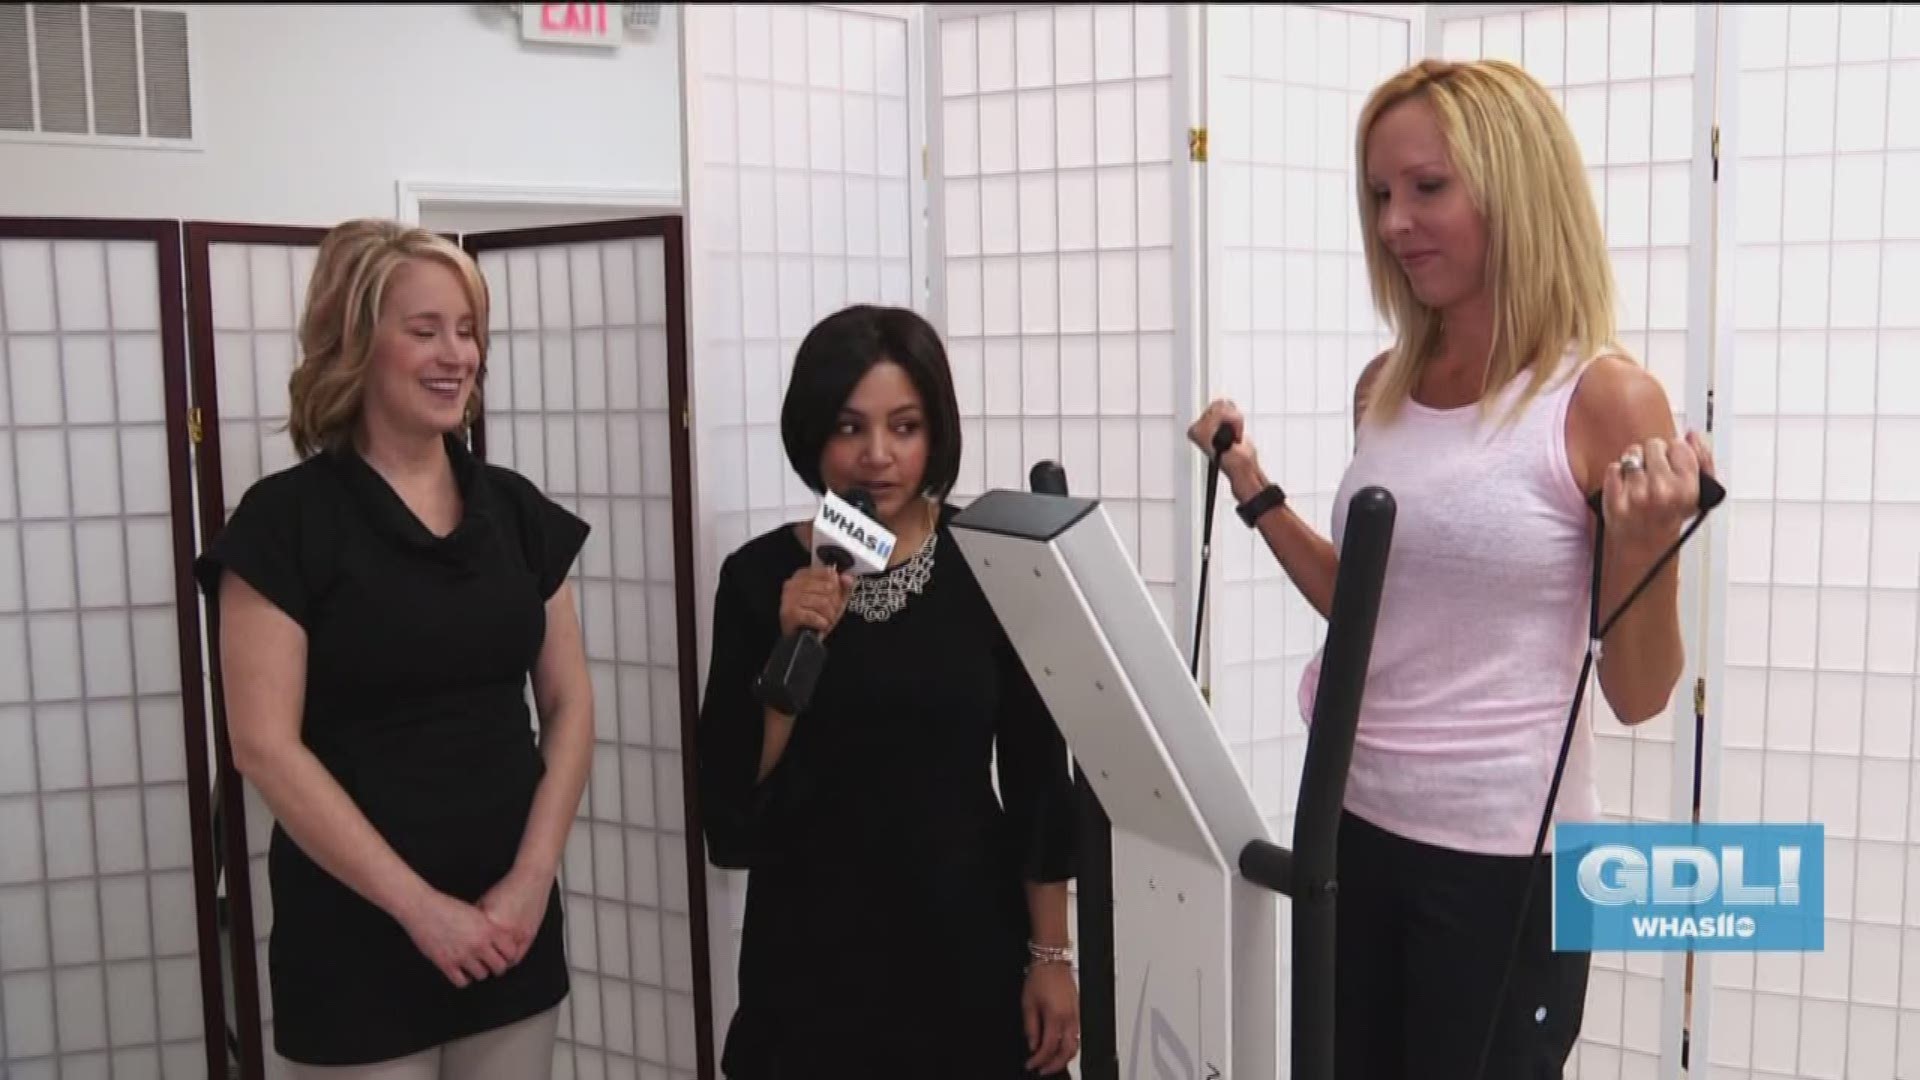 Angie Fenton is at Reve with details on a special offer that could have you losing inches in no time.